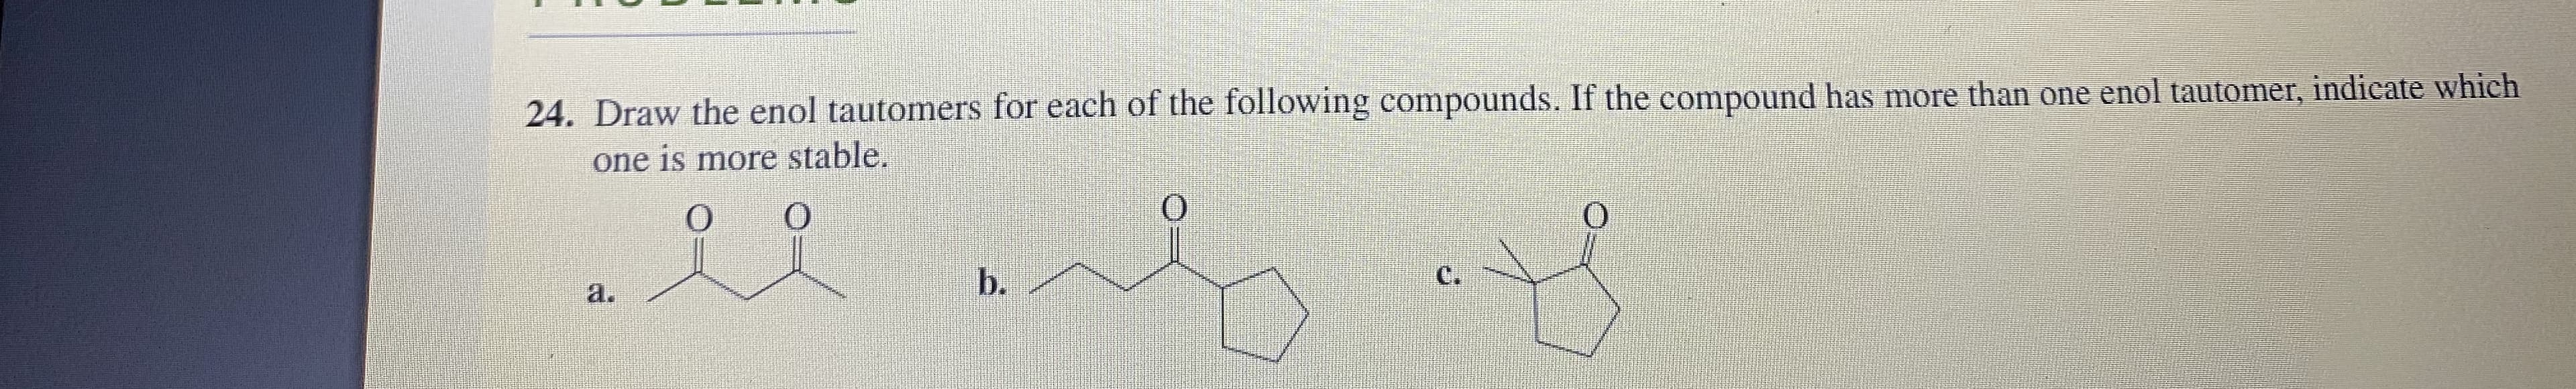 24. Draw the enol tautomers for each of the following compounds. If the compound has more than one enol tautomer, indicate which
one is more stable.
b.
с.
a.
